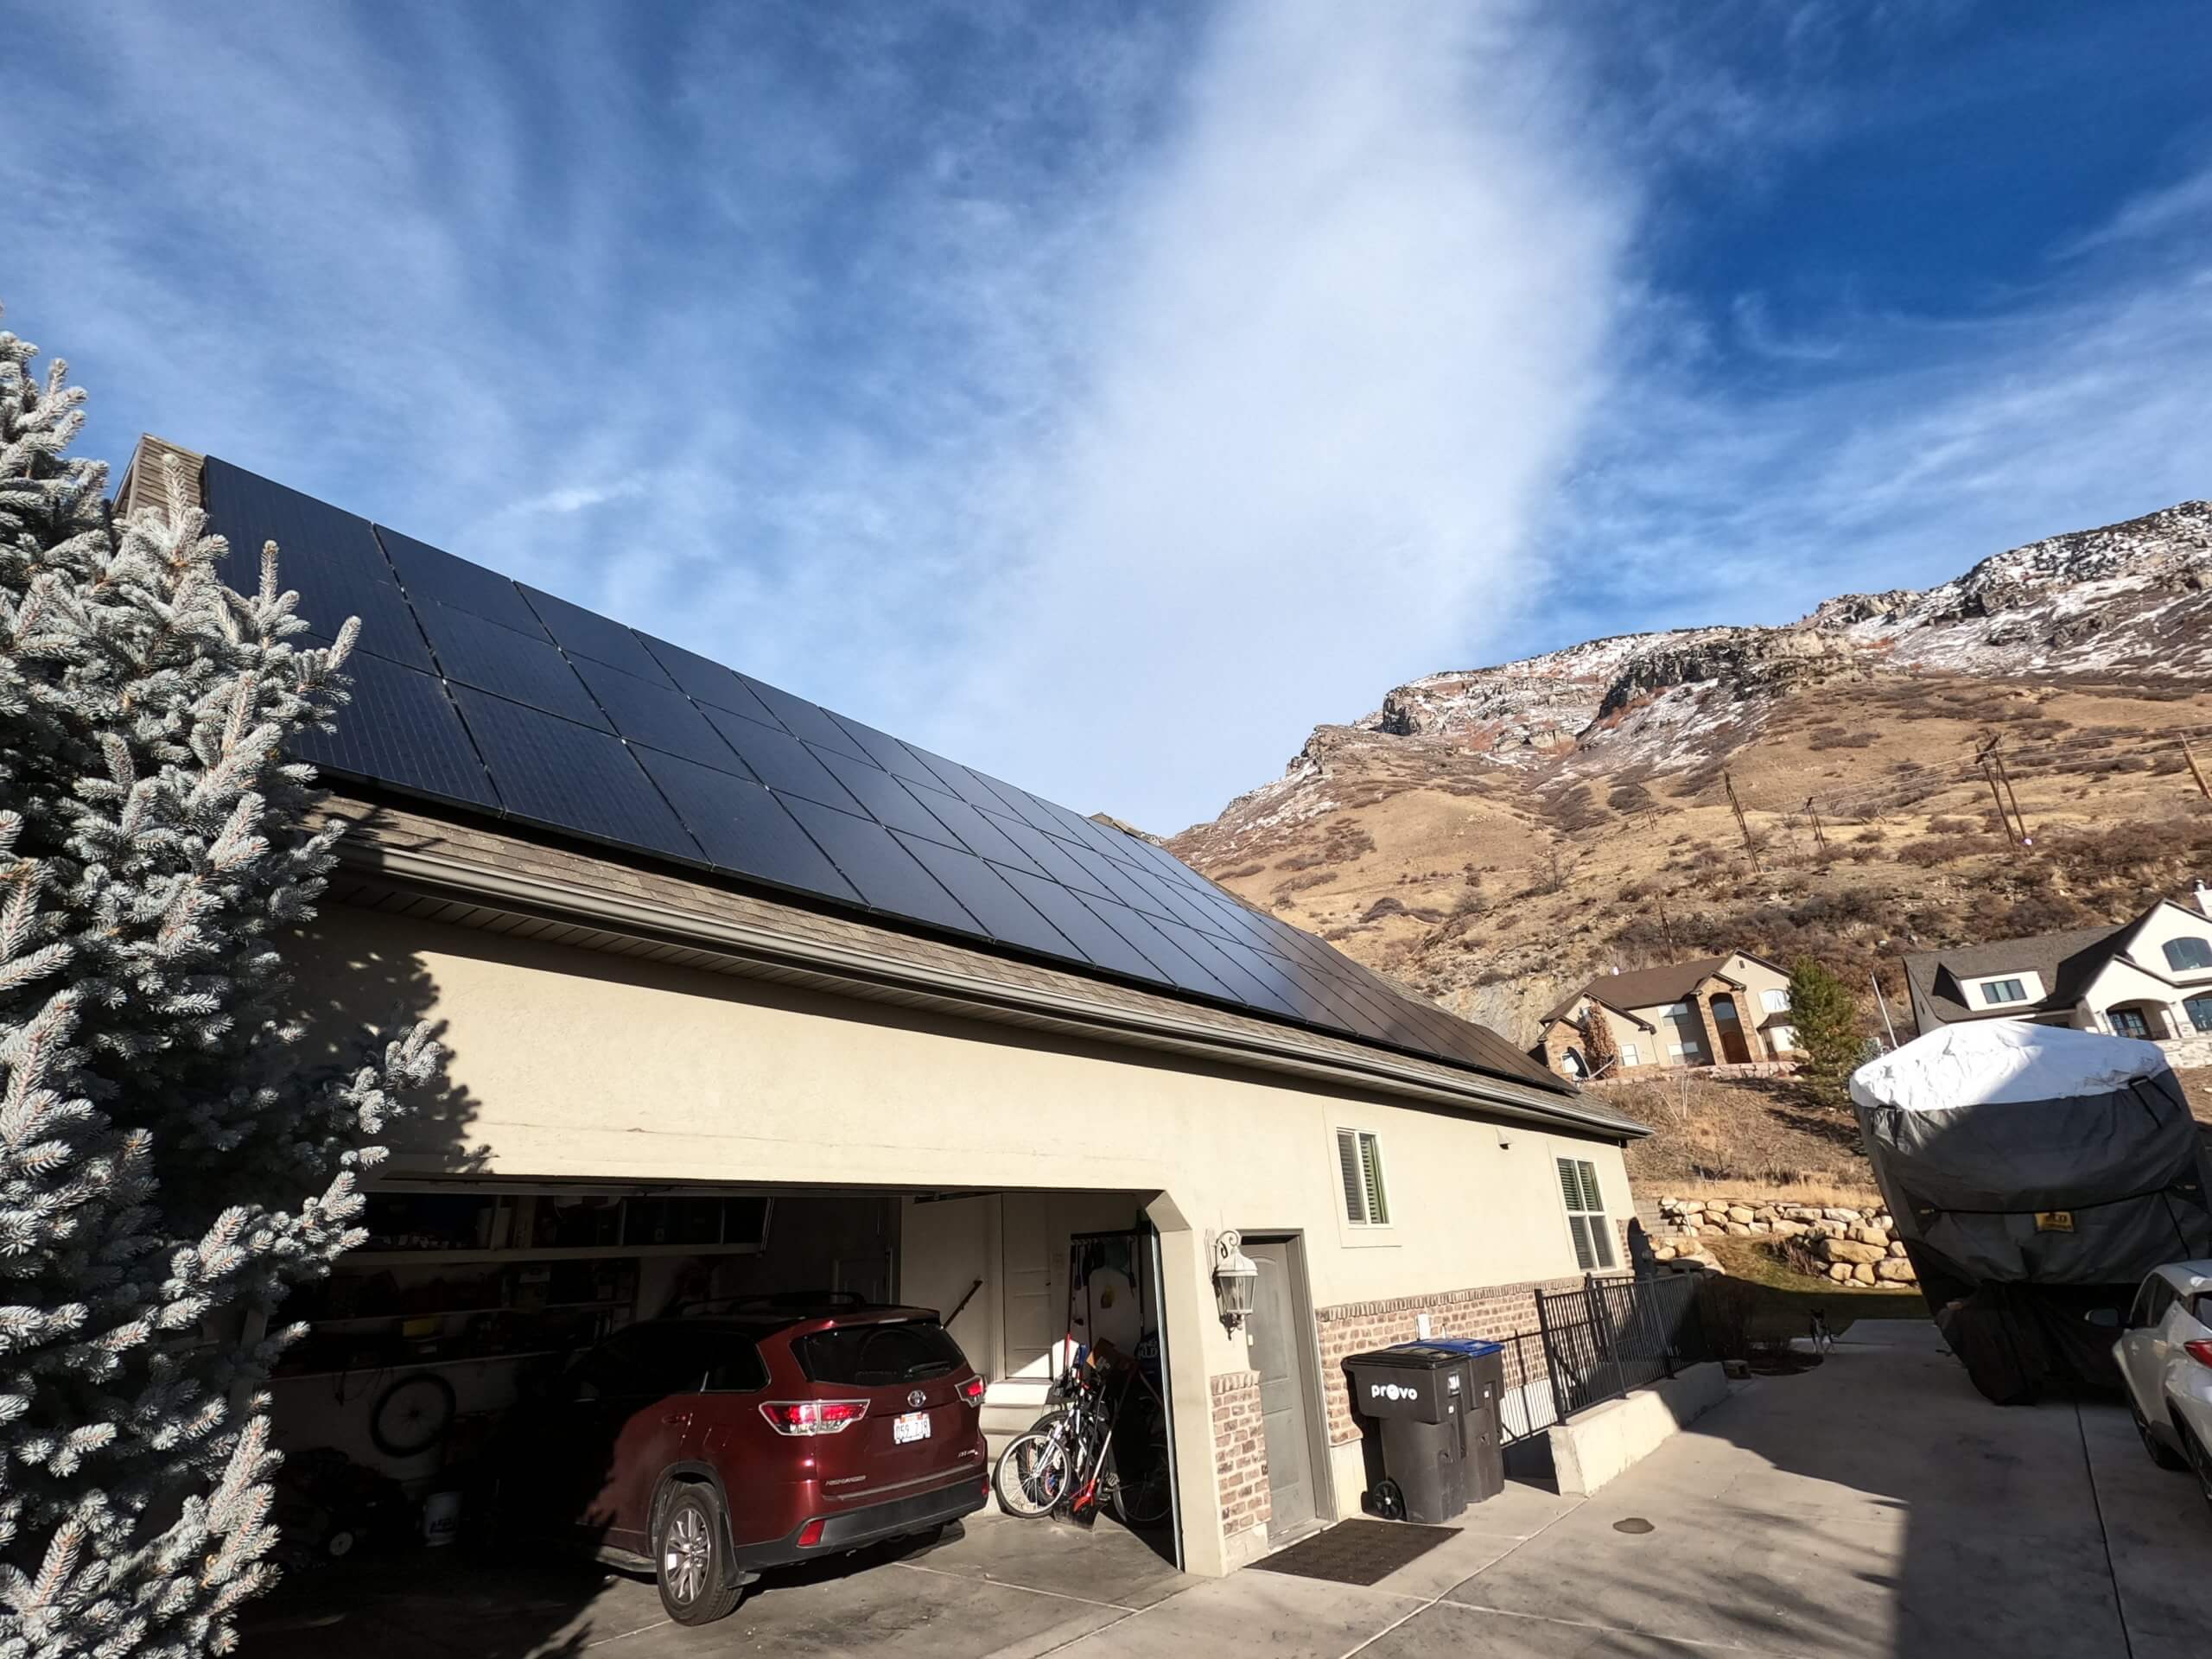 Provo home with solar panels on roof